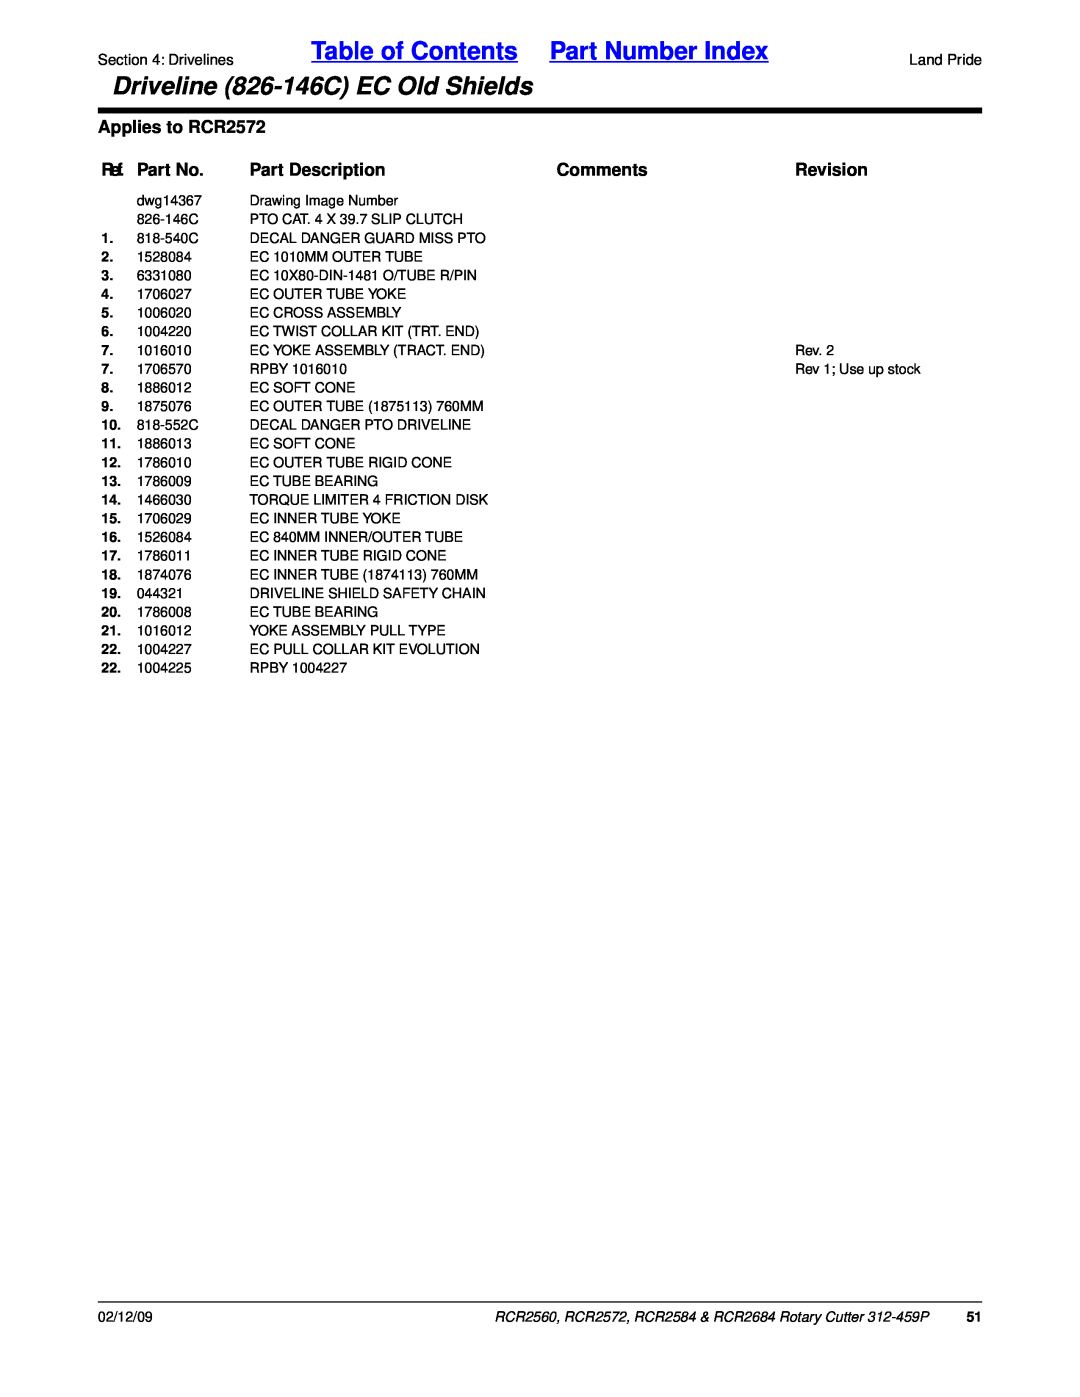 Land Pride RCR2560 Table of Contents Part Number Index, Driveline 826-146CEC Old Shields, Applies to RCR2572, Ref. Part No 